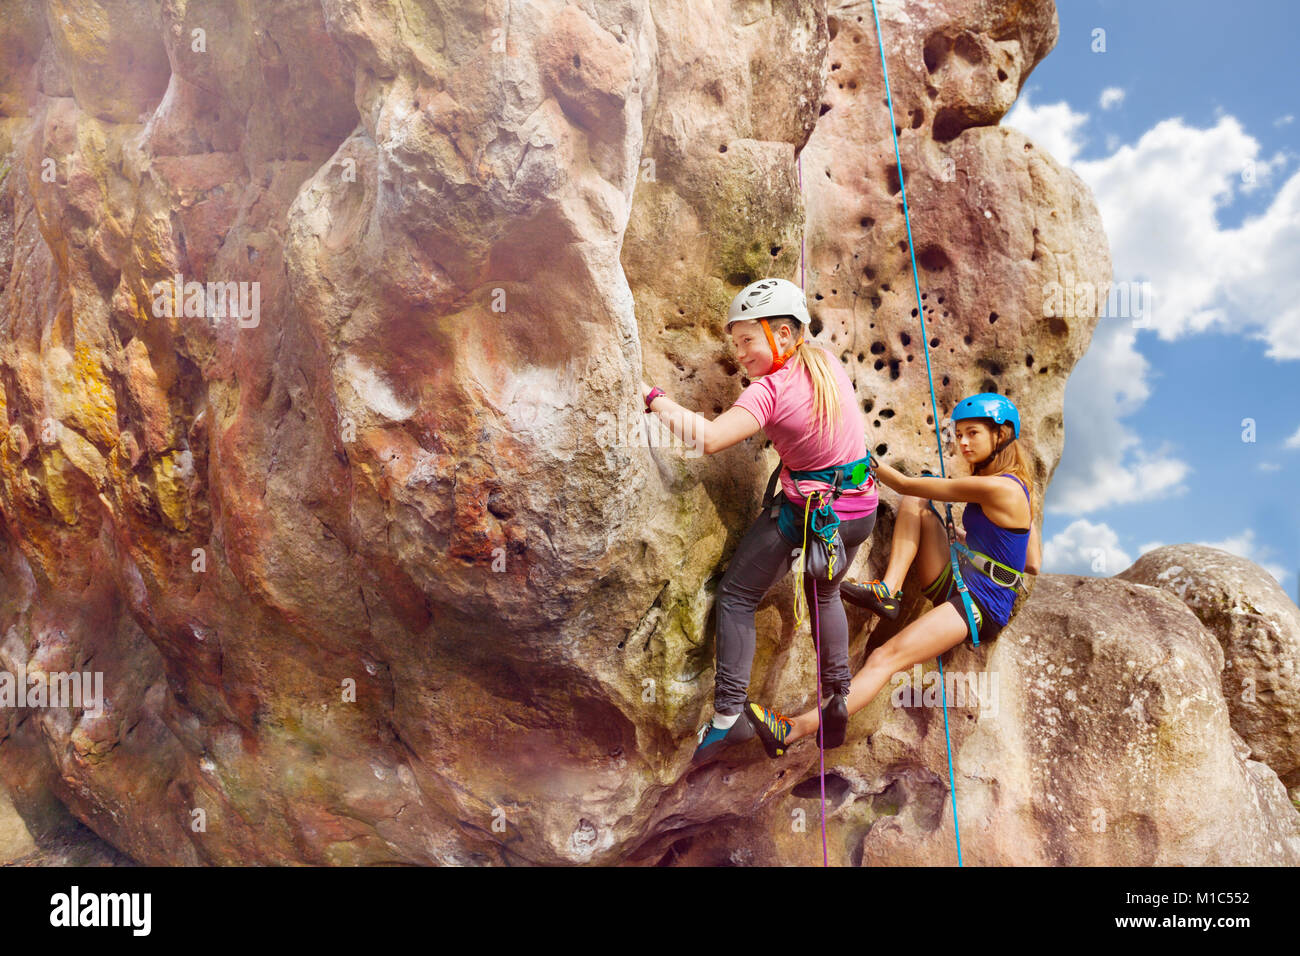 Female alpinists in helmets climbs the rock with harnesses against cloudy sky Stock Photo